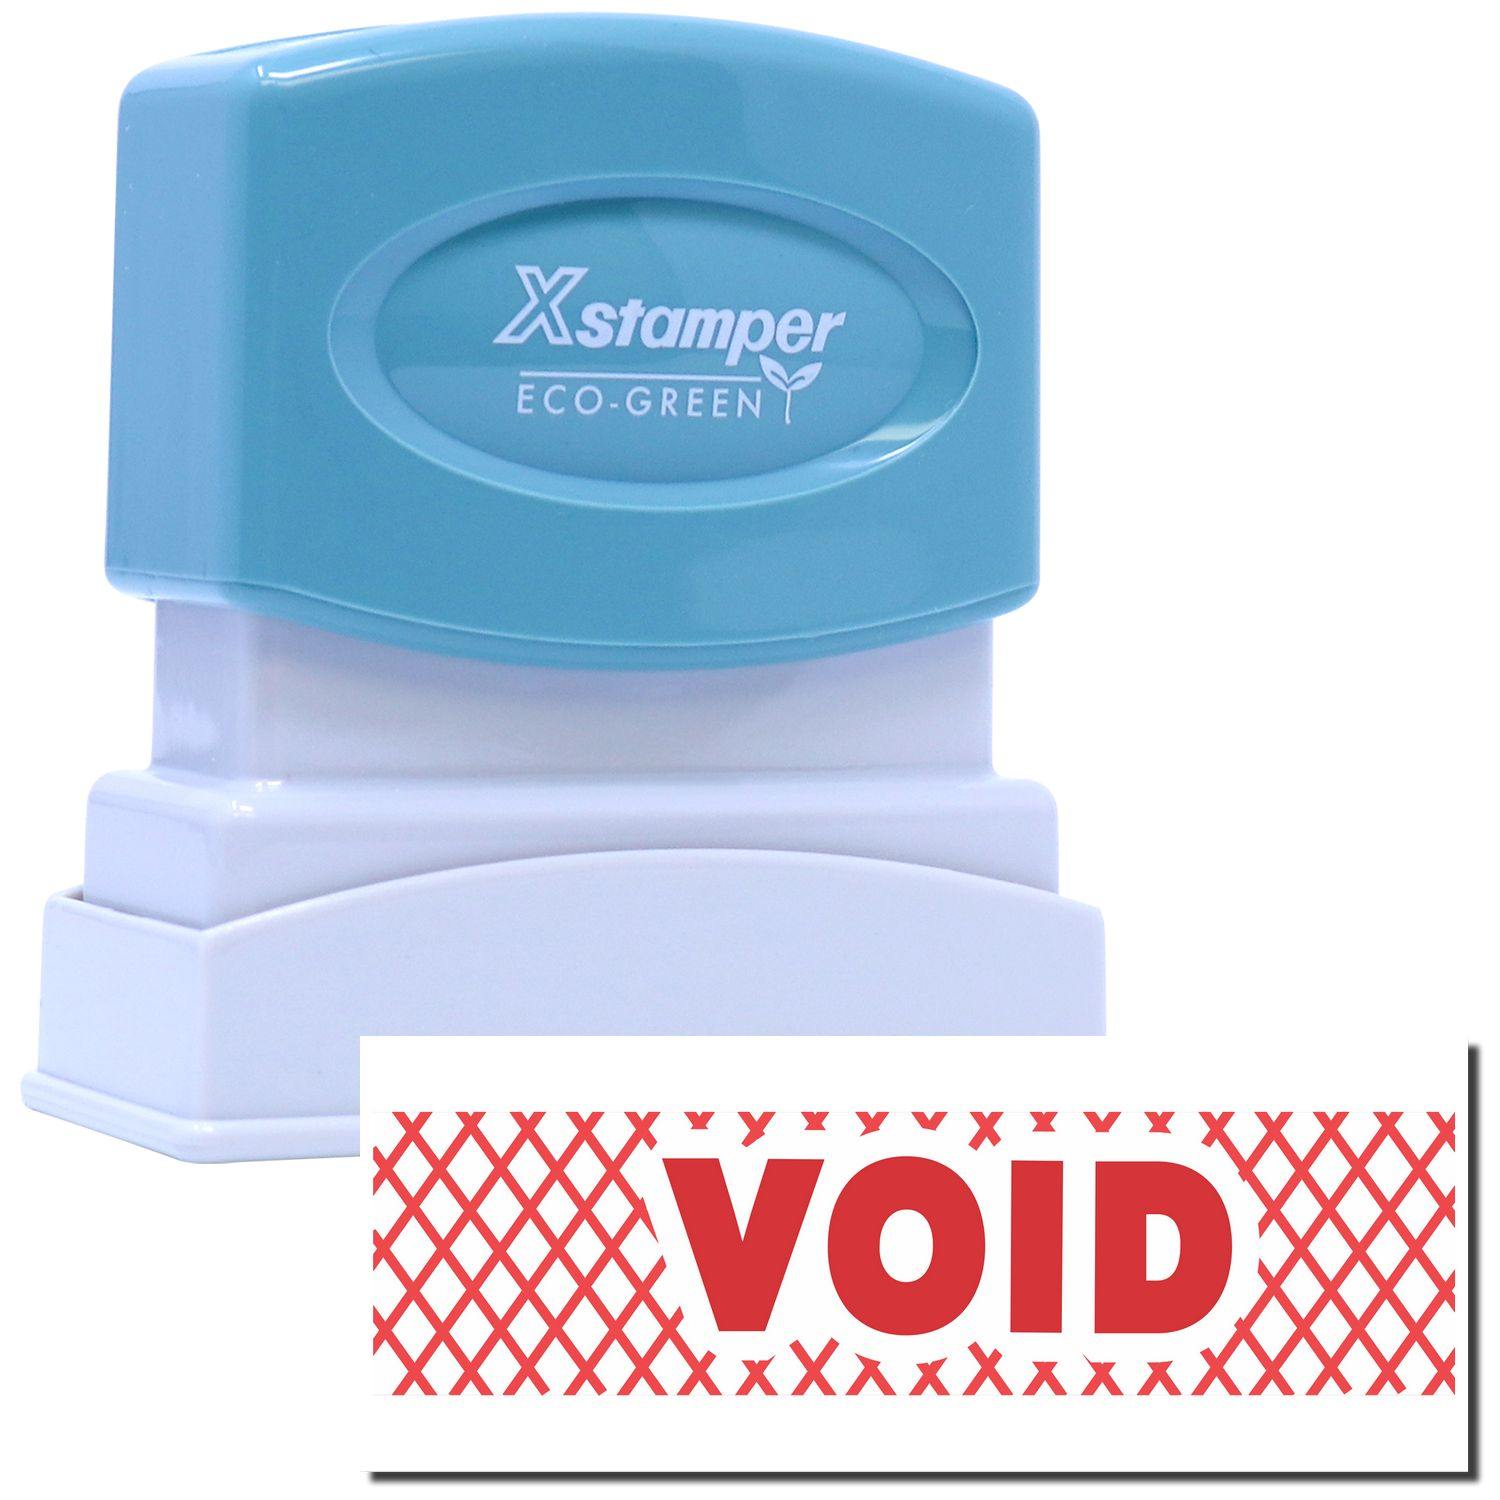 An xstamper stamp with a stamped image showing how the text "VOID" in a red font with cross (x) signs all around it is displayed after stamping.